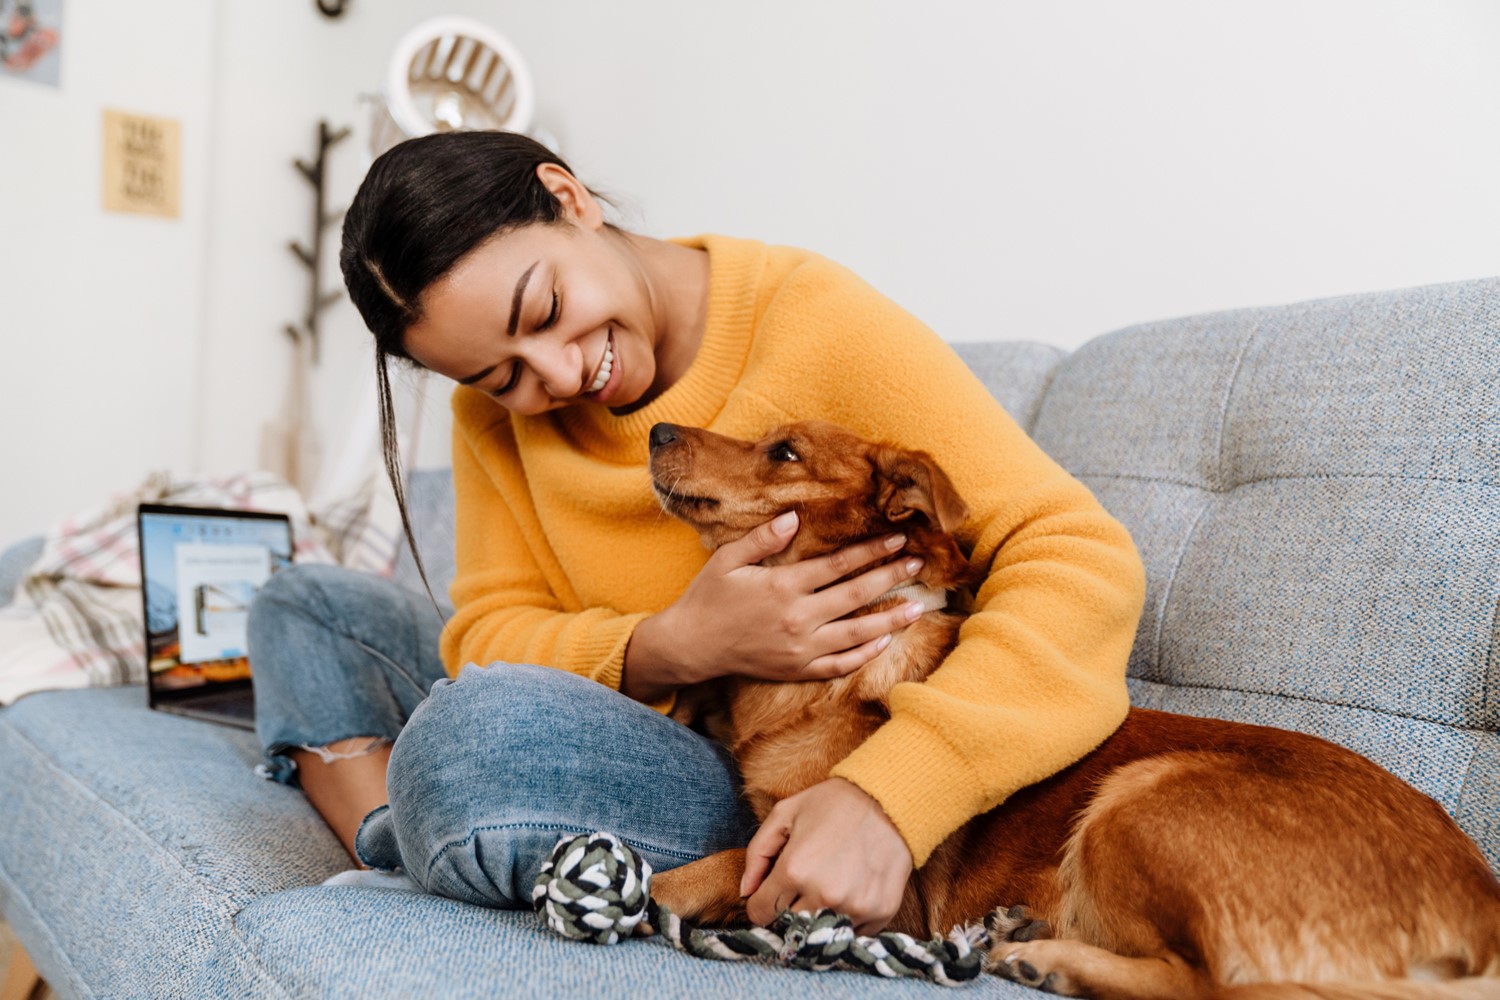 A Smiling Woman in a Yellow Sweatshirt and Jeans Sits on a Couch and Embraces a Red-Haired Dog Sitting with its Rope Toy